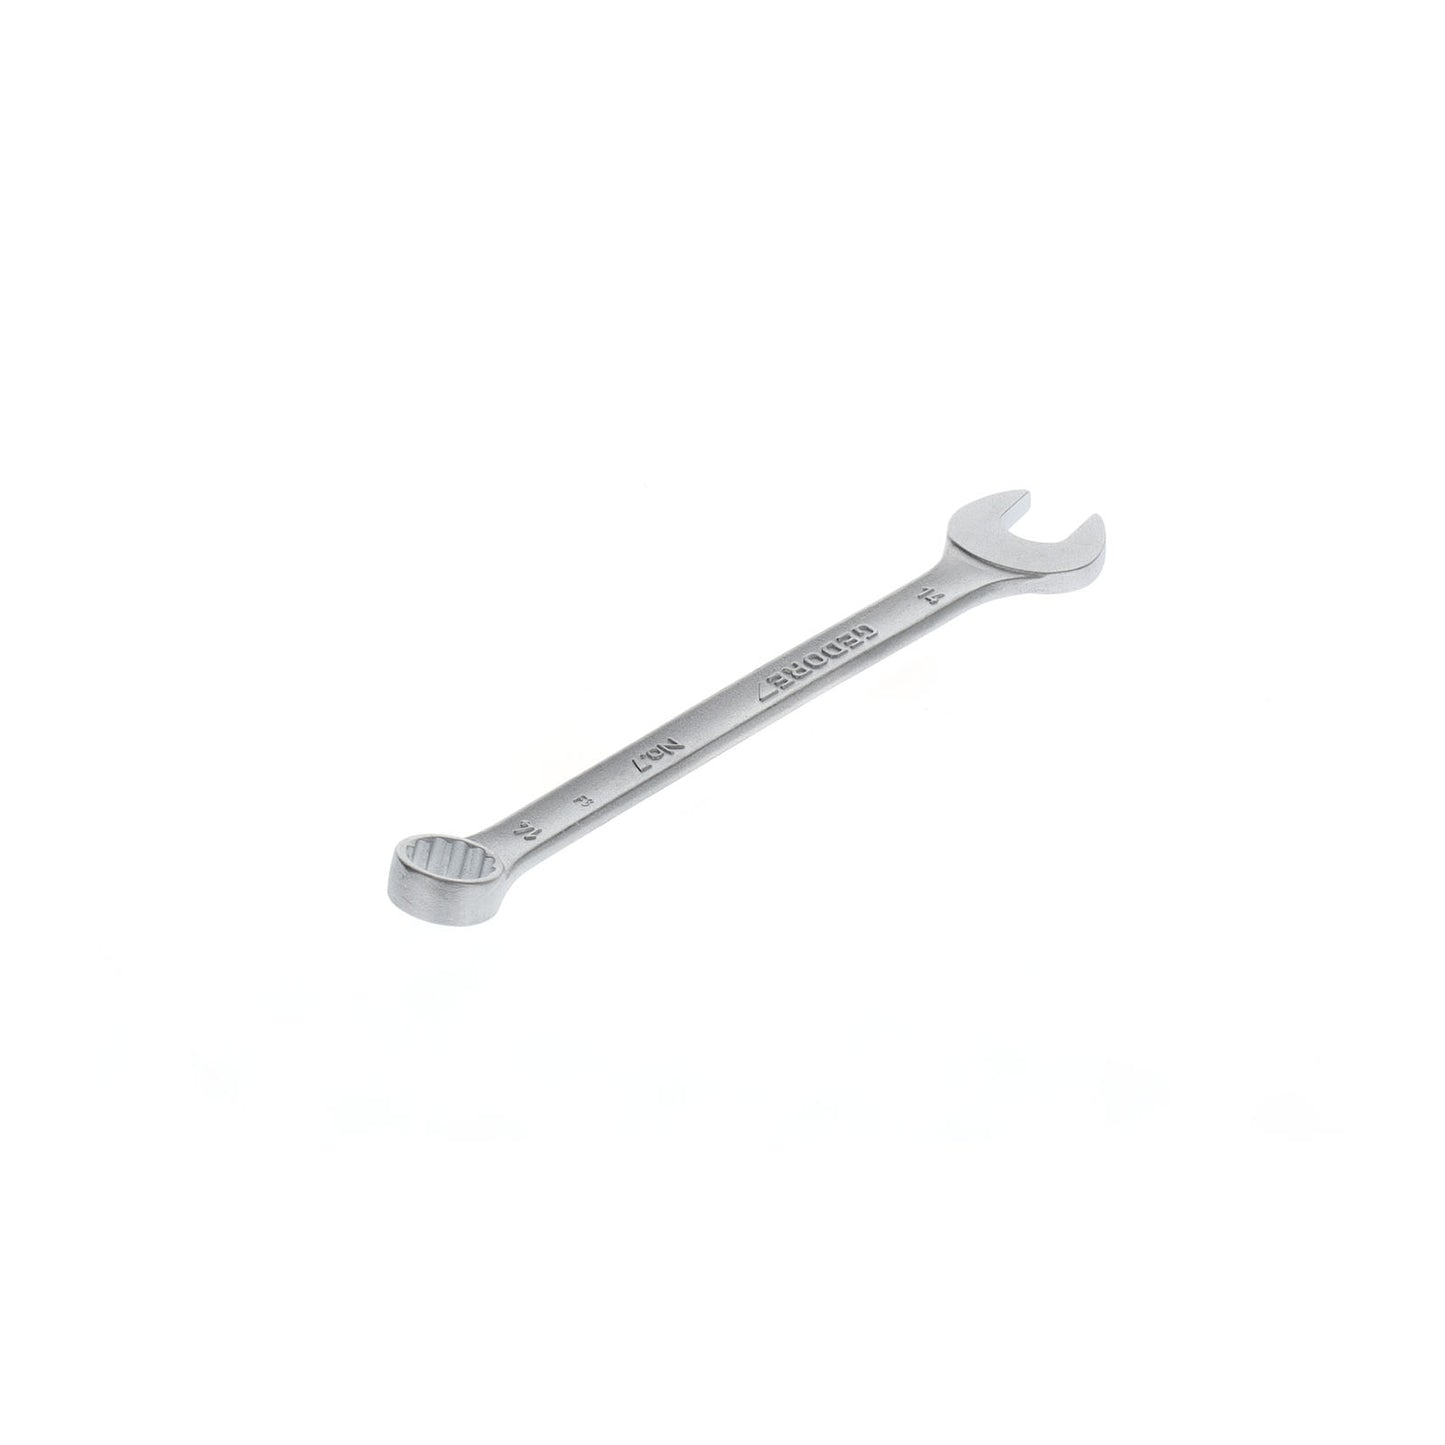 GEDORE 7 14 - Combination Wrench, 14 mm (6090560)